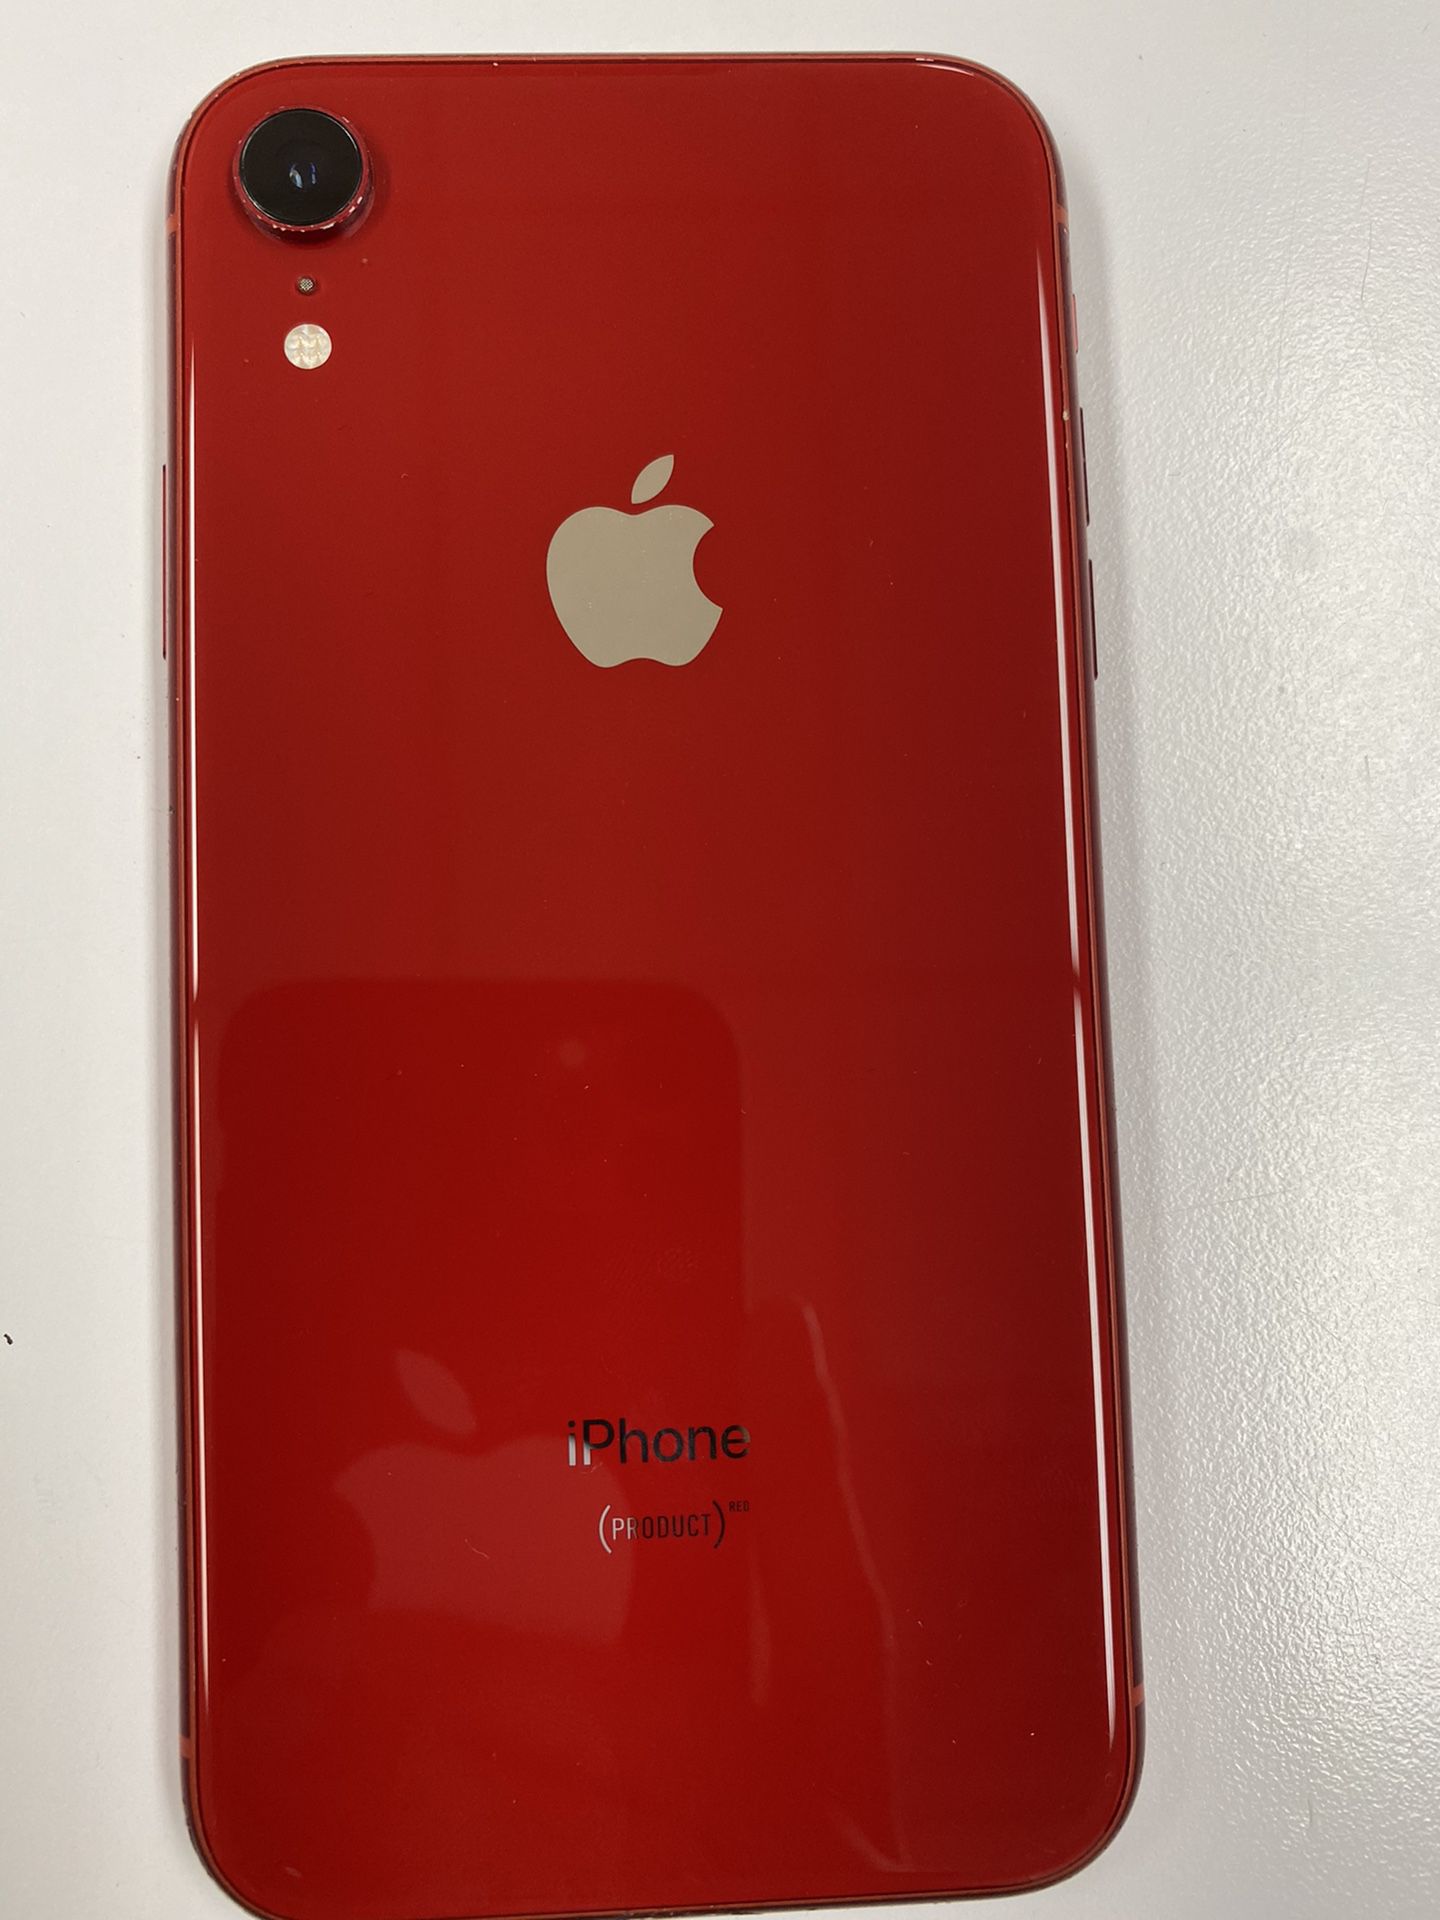 Sprint/ Boost Iphone XR 64 GB RED